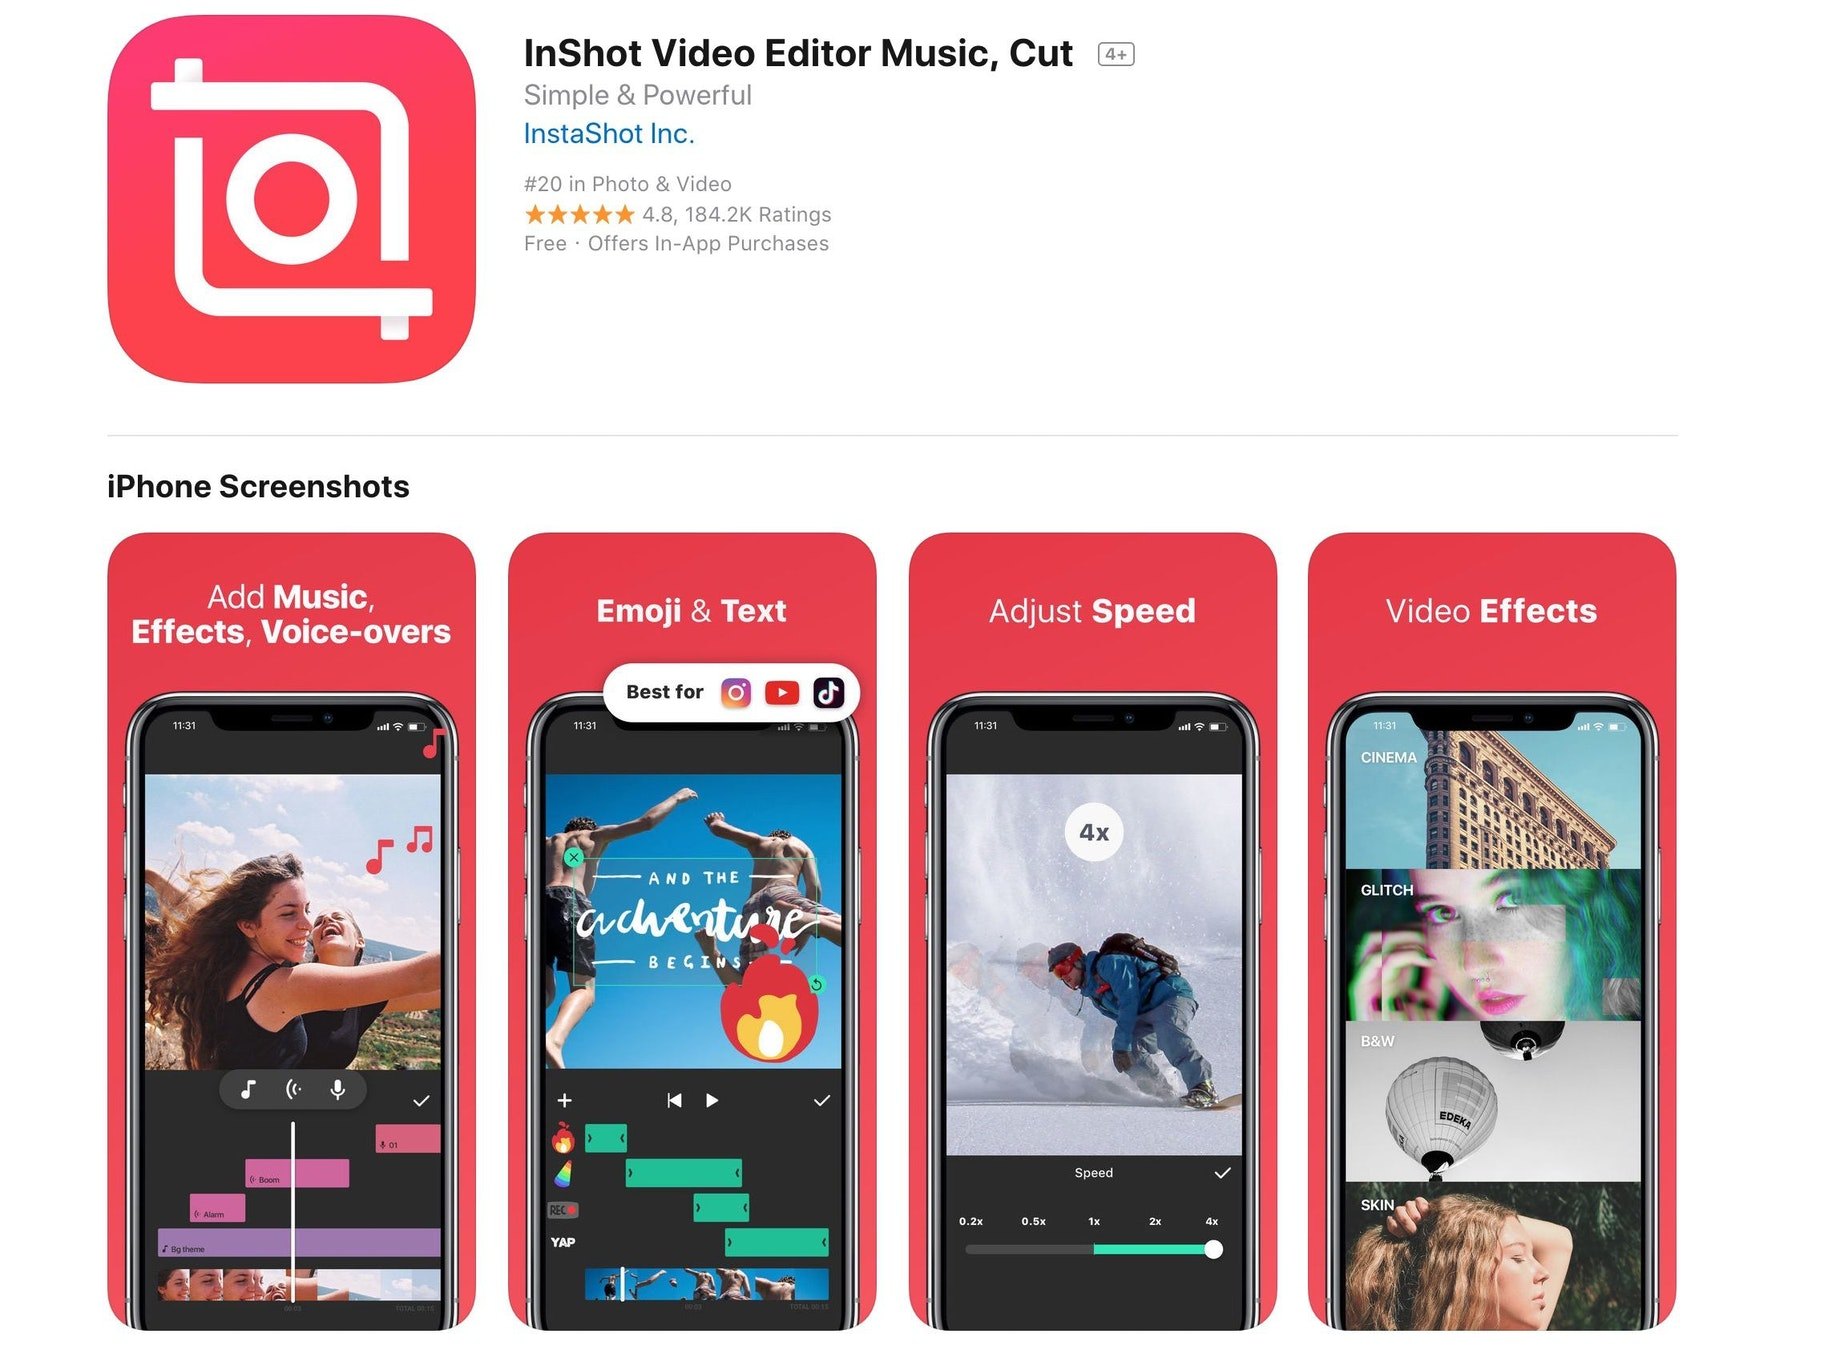 See How Users Can Edit Videos for Free with this App